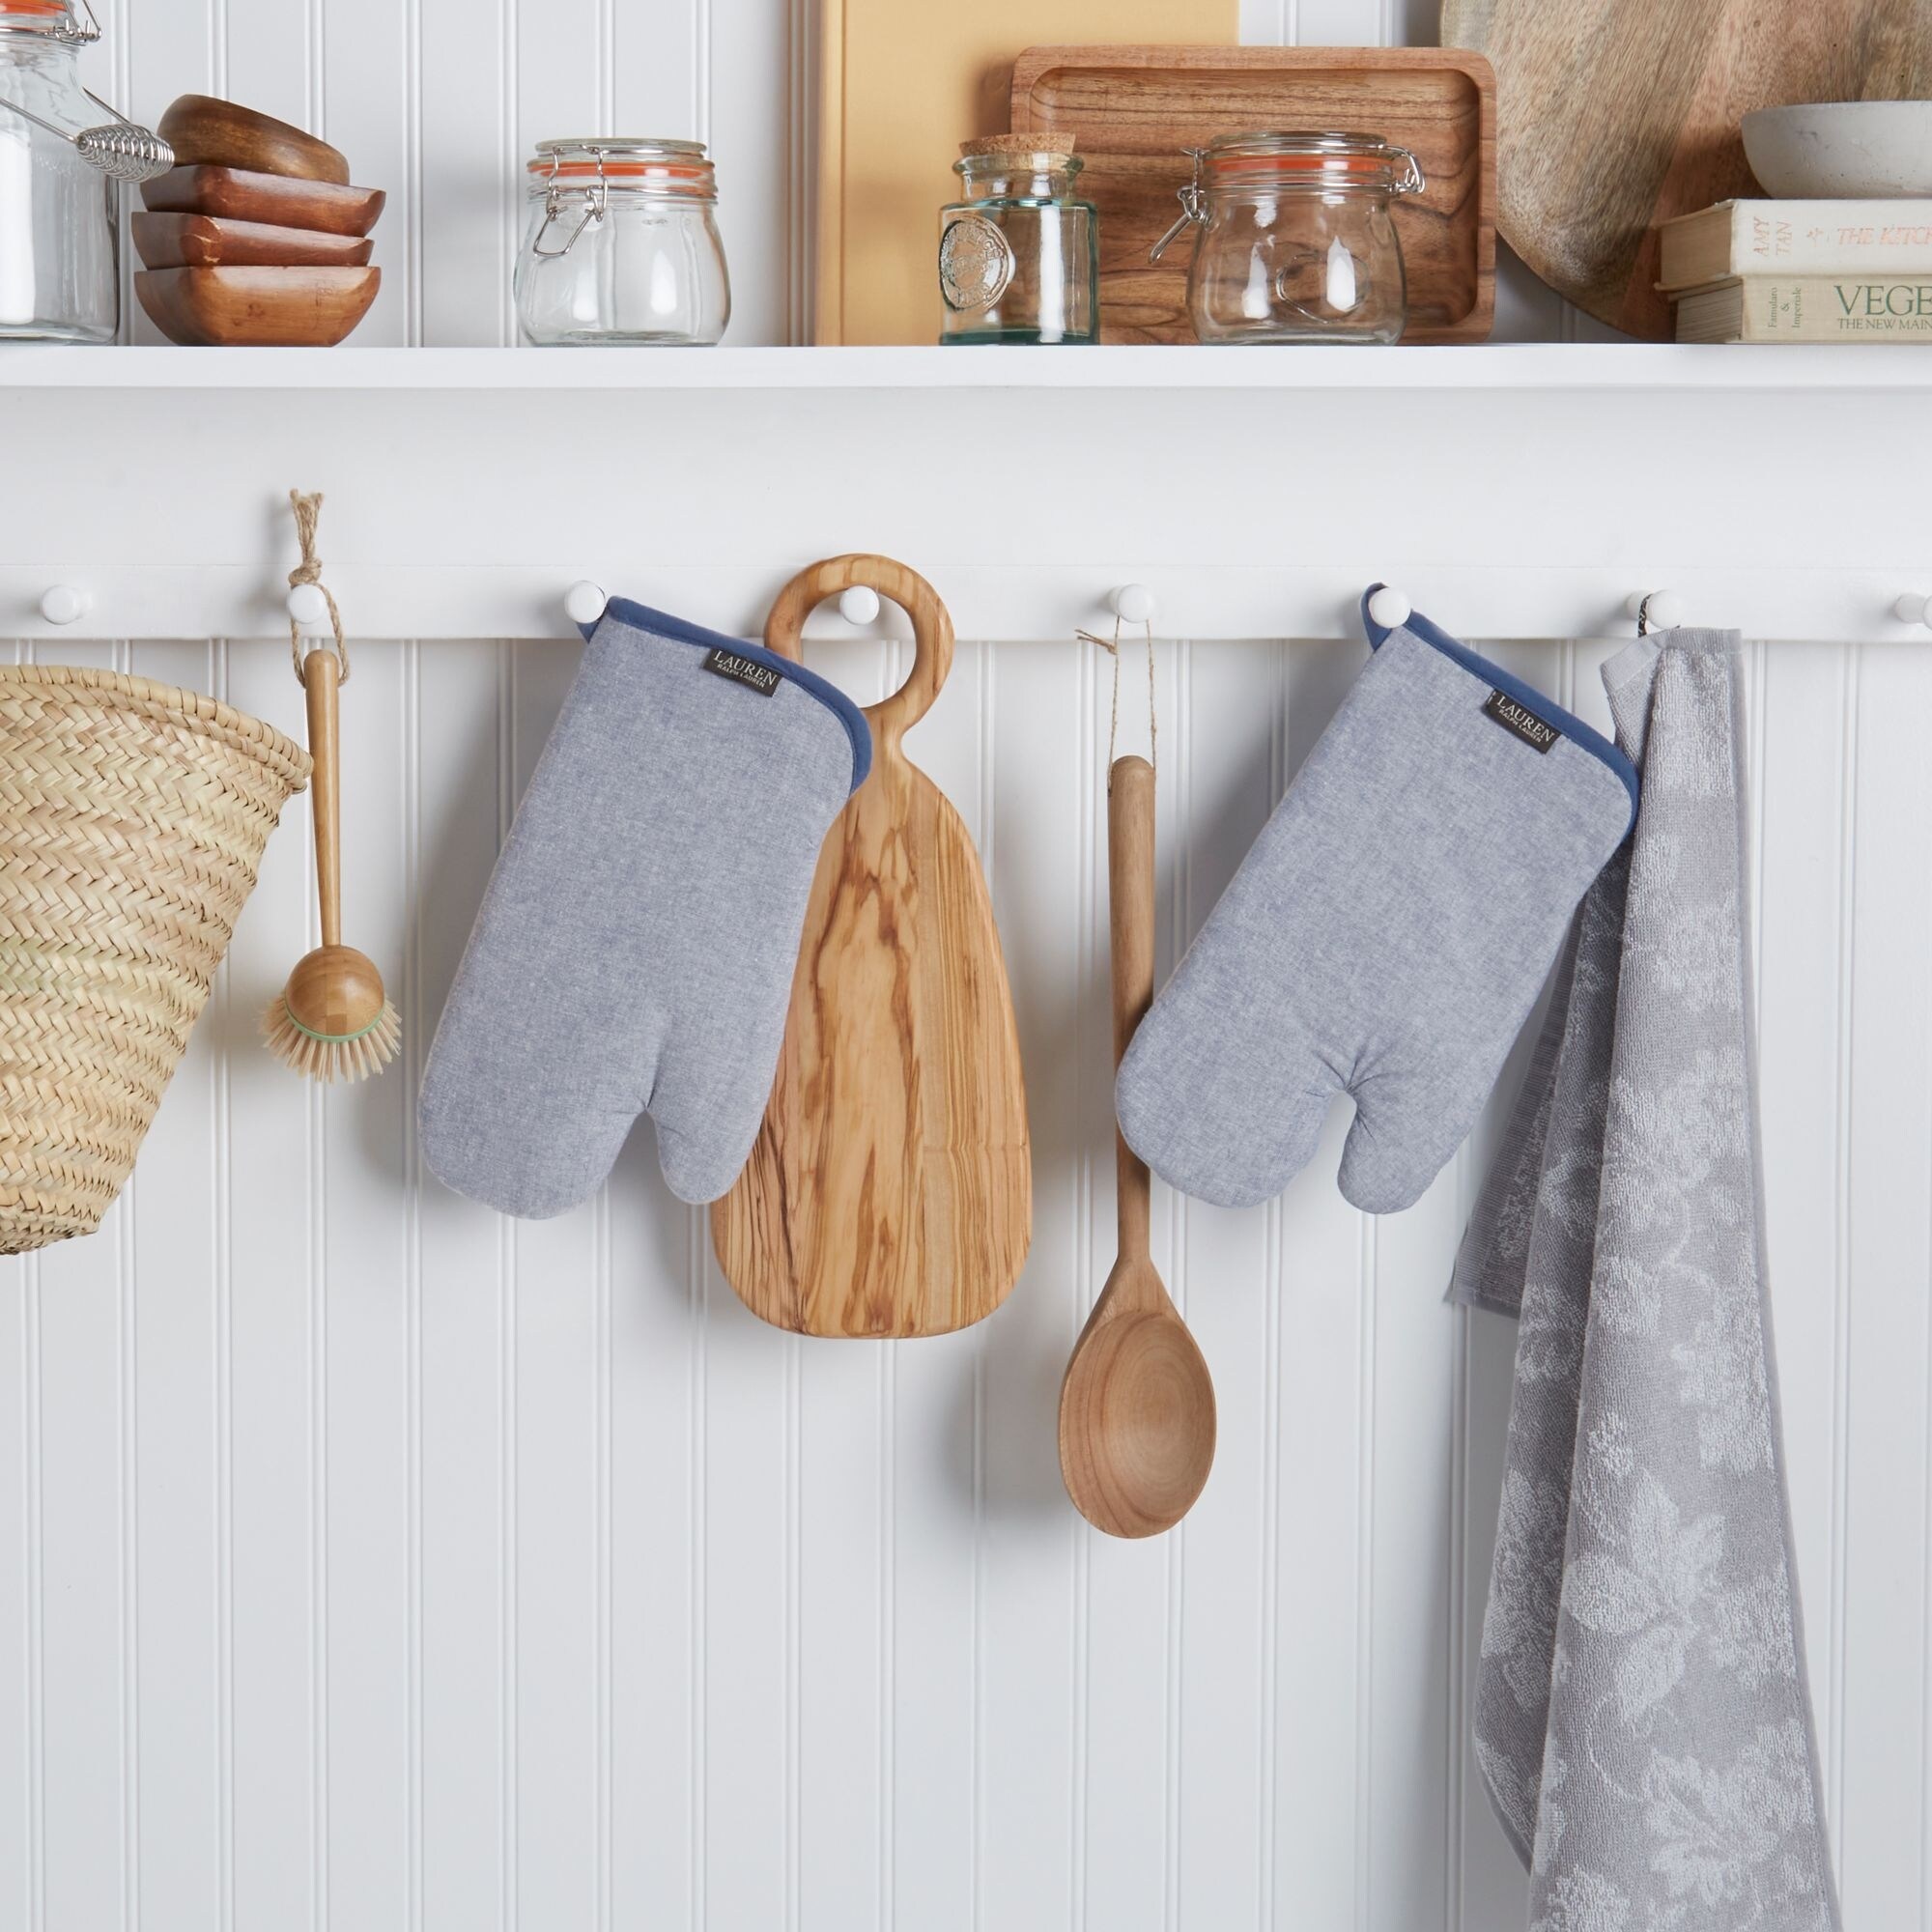 https://ak1.ostkcdn.com/images/products/is/images/direct/c846767be4ad6ef2ef158e32c743f69023a25c3c/Ralph-Lauren-Chambray-Woven-Mini-Oven-Mitt-Set%2C-2-Piece.jpg